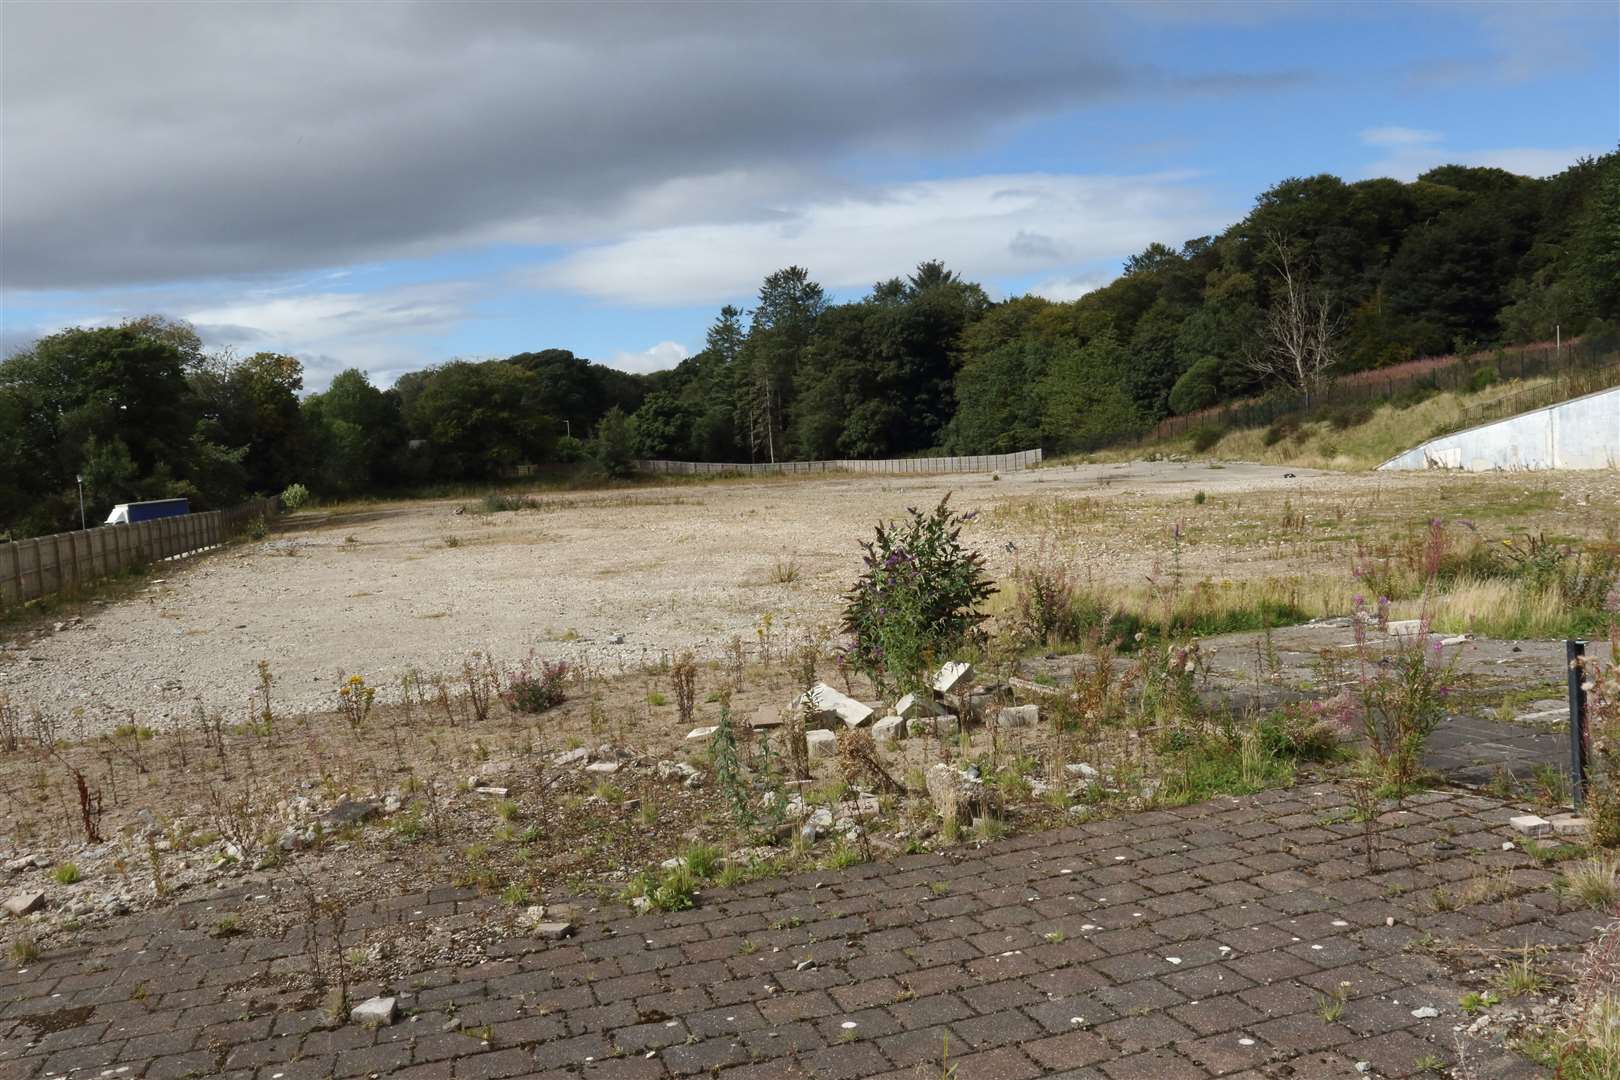 The former academy site in Ellon is marked for a housing development